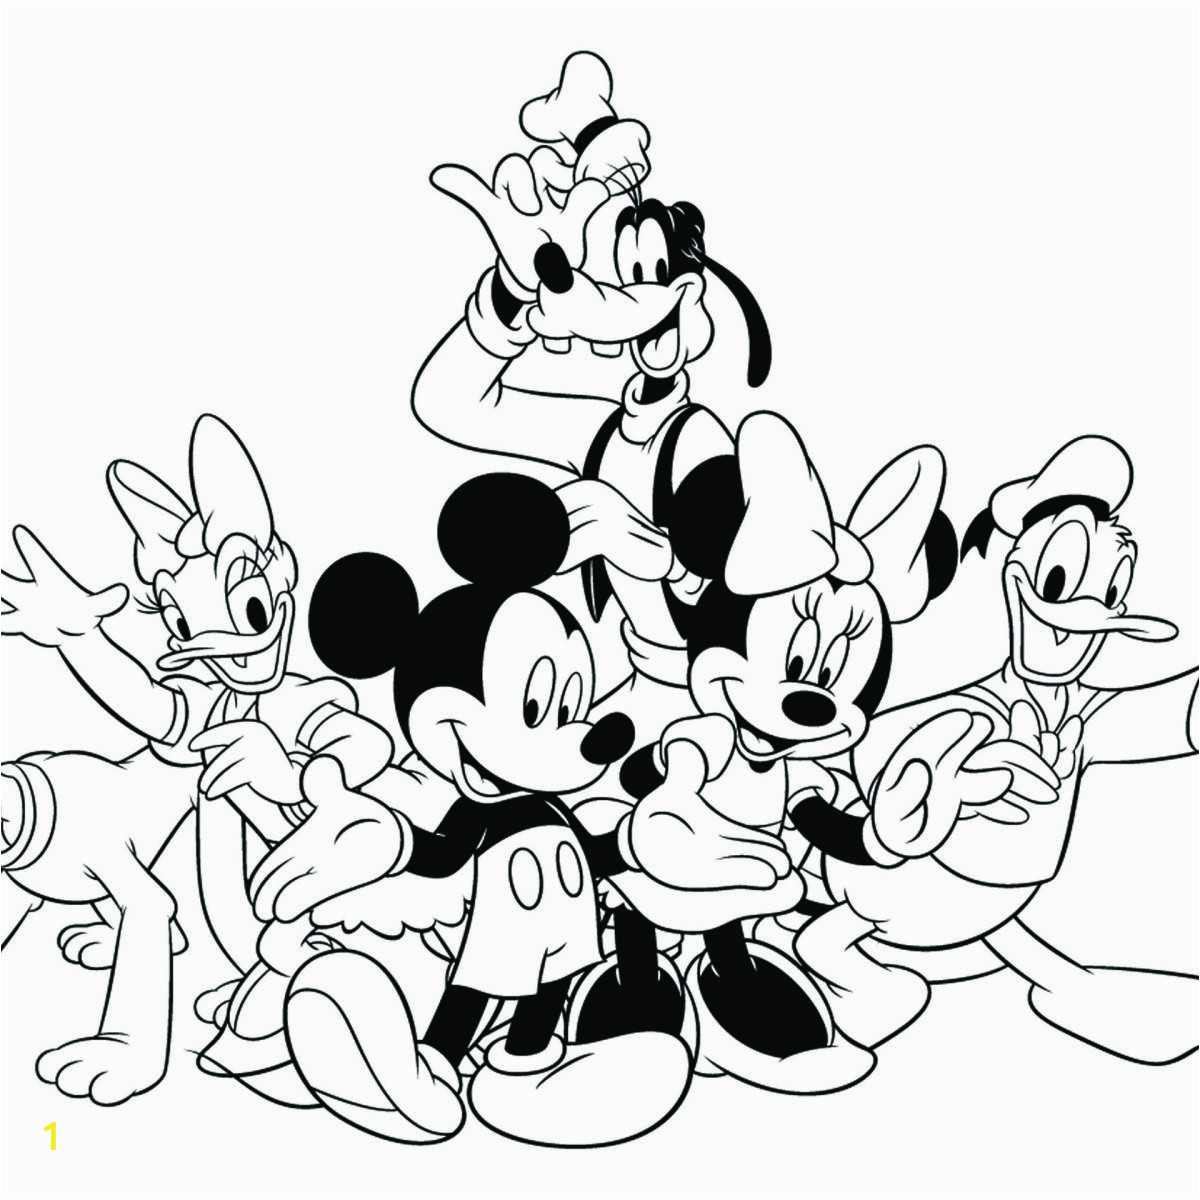 c d7f e6a83eaab8653c2d50 28 collection of mickey mouse and friends christmas coloring 1200 1200